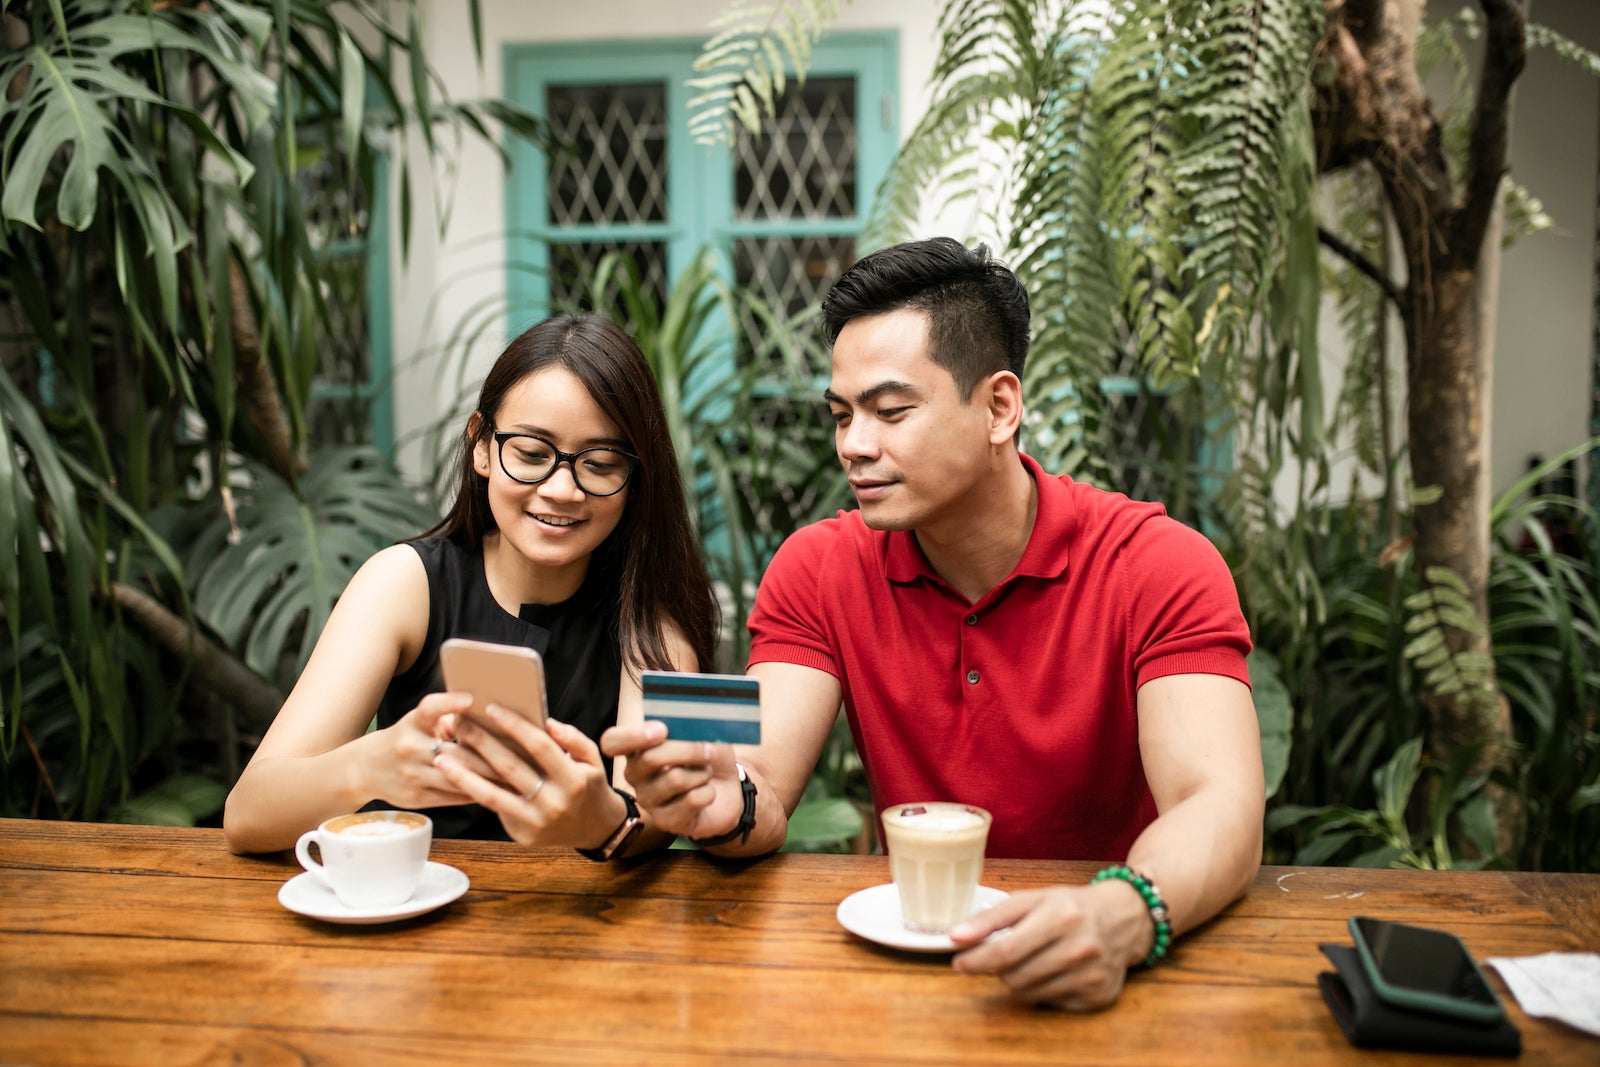 Beautiful adult couple at cafe shopping online while man holds credit card both smiling